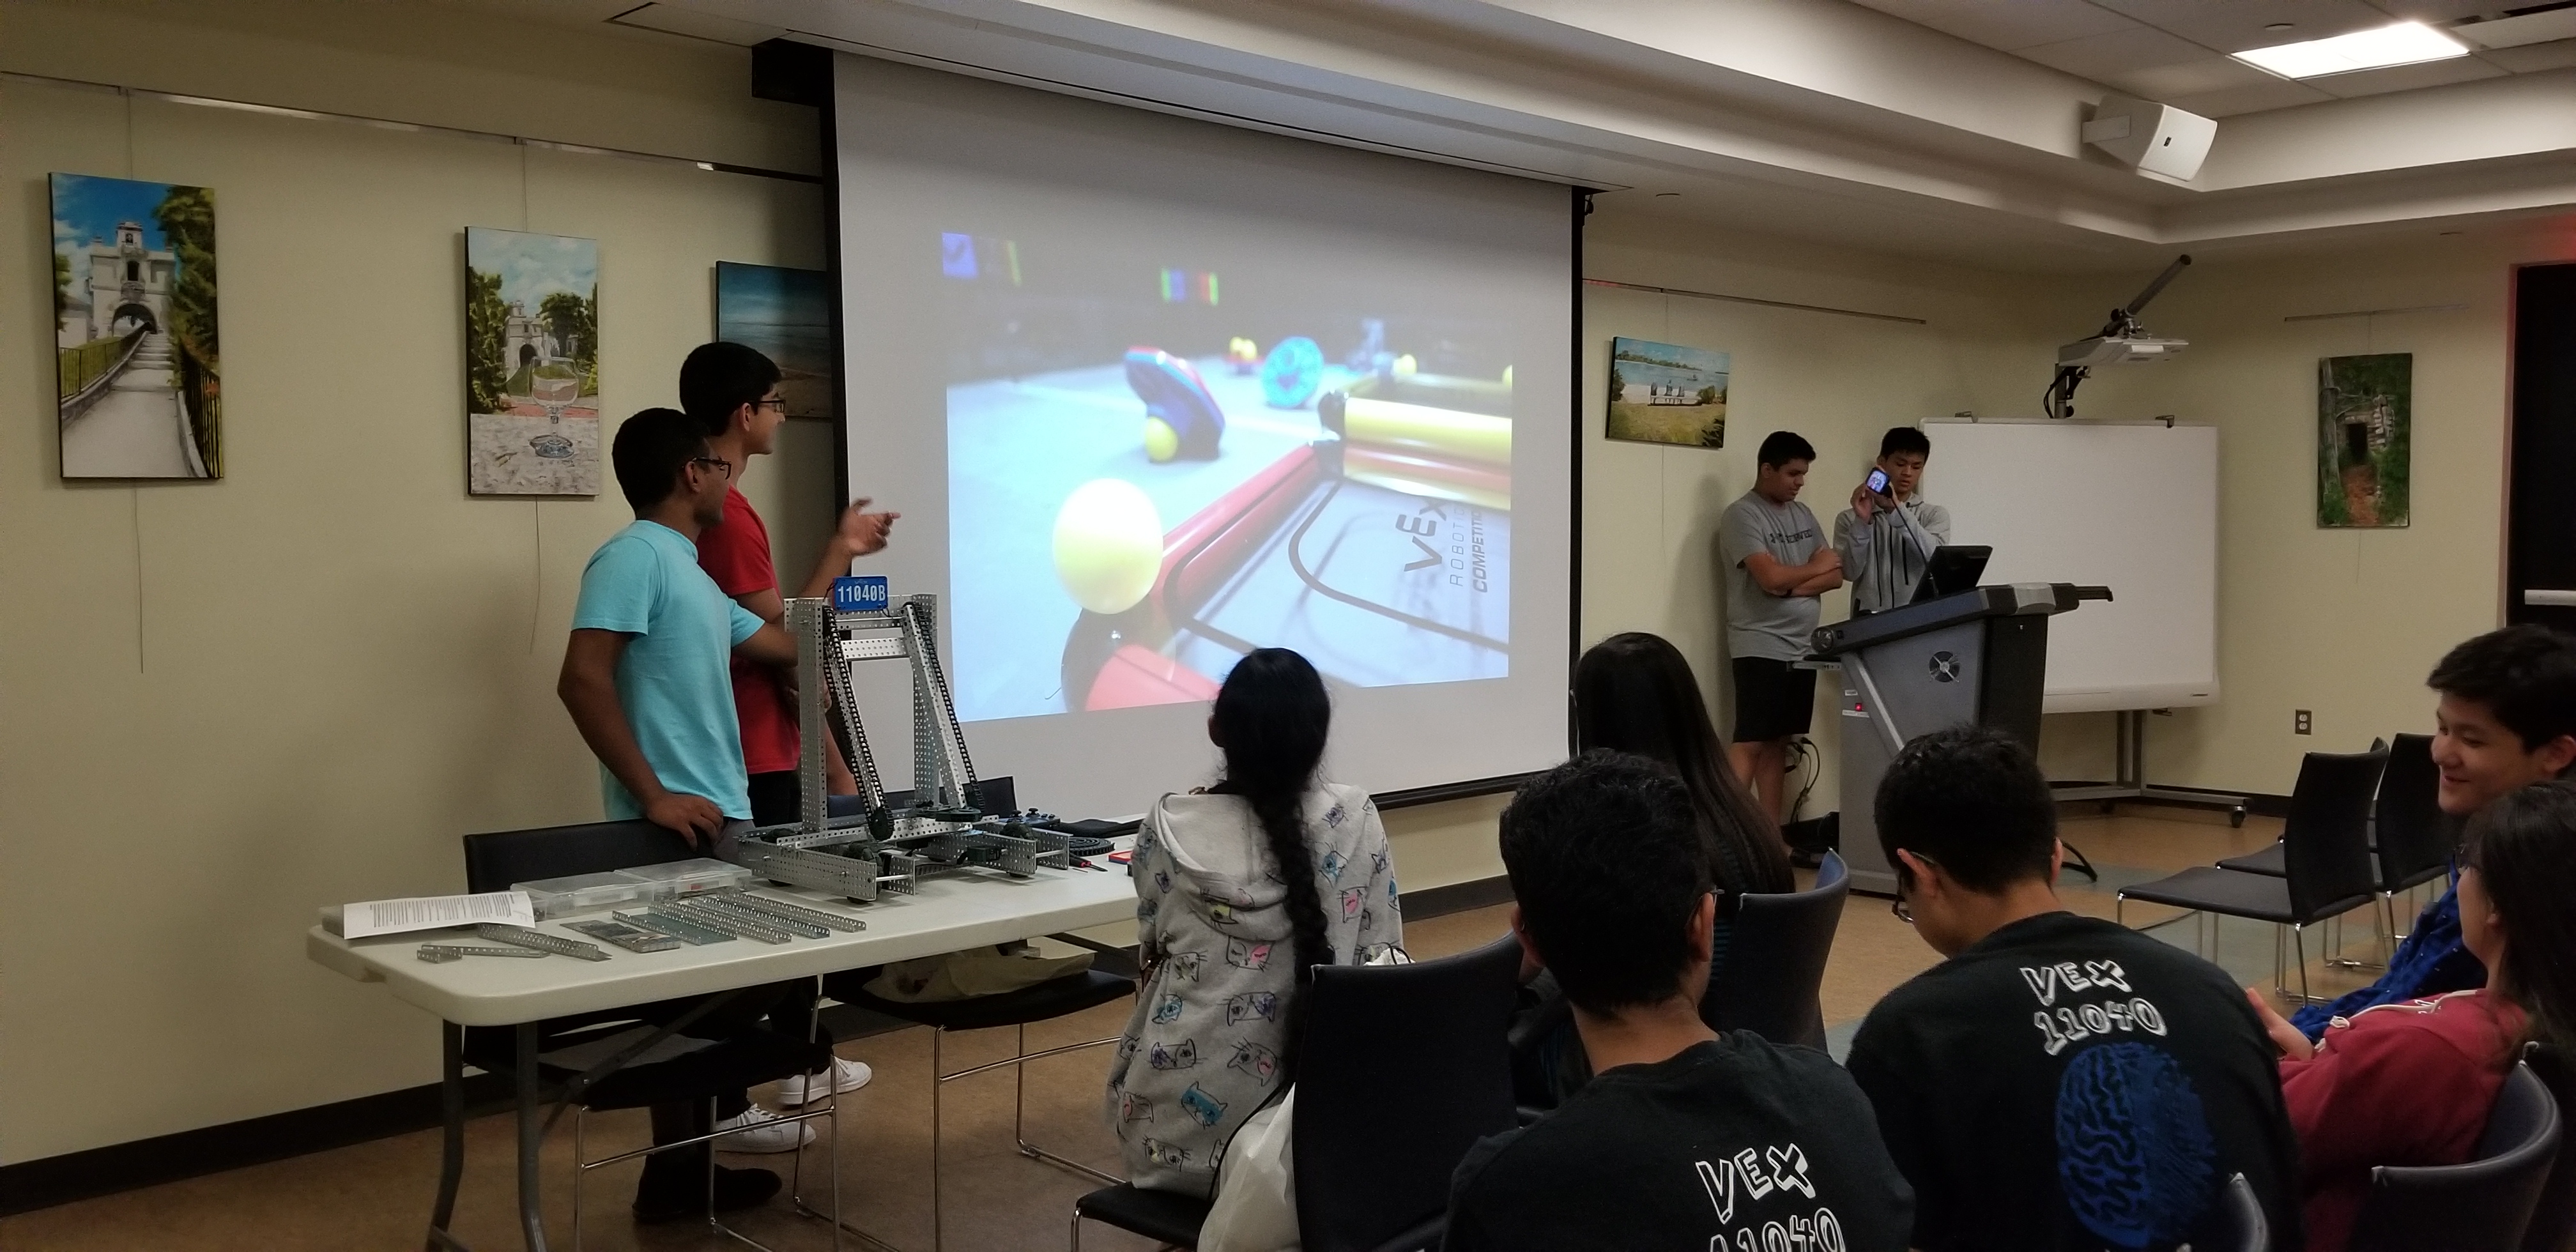 May 2018: Our club presents to middle school students at a local library to introduce robotics to them        